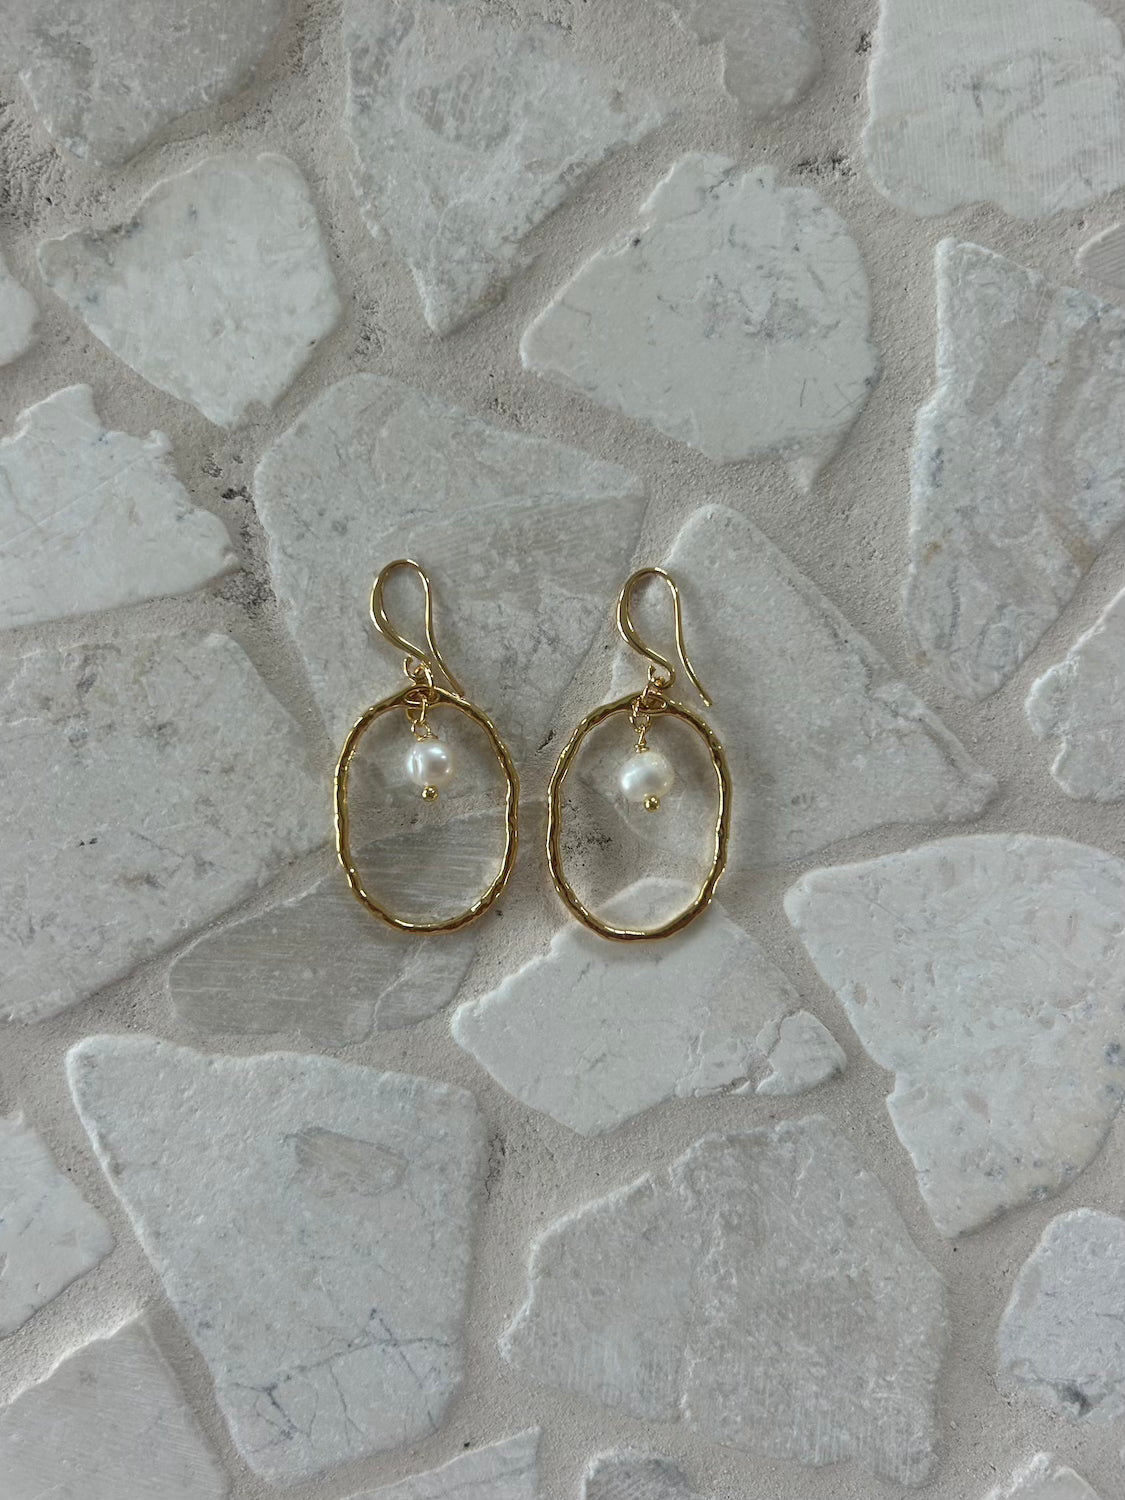 Malia Jewellery - 18k Gold plated hook earrings with pearl droplets and tampered open hoop design 